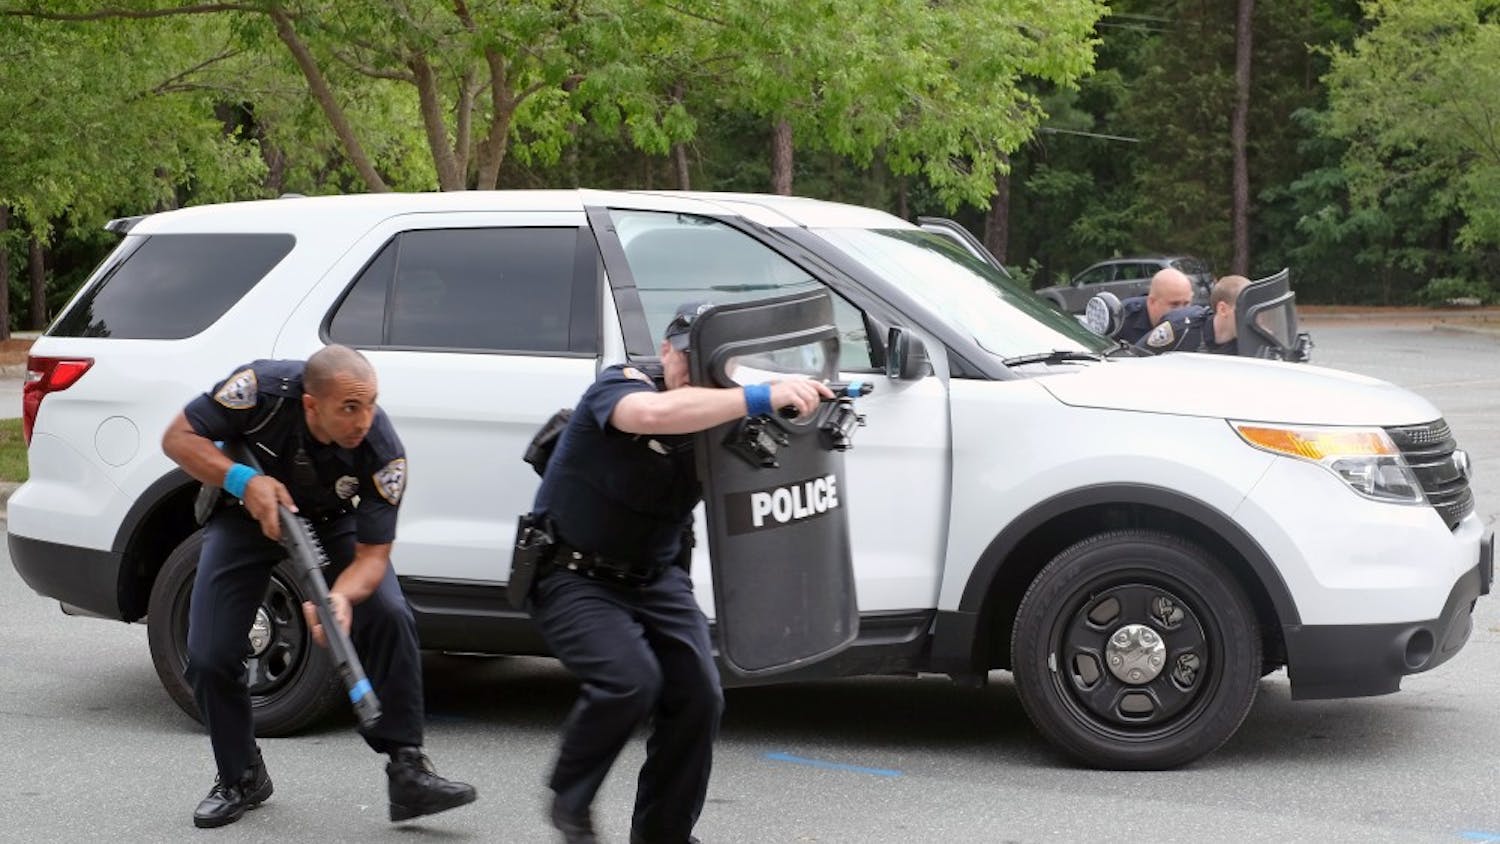 On Monday August 10, the Department of Public Safety held an emergency response drill in response to a communication failure that happened in July.